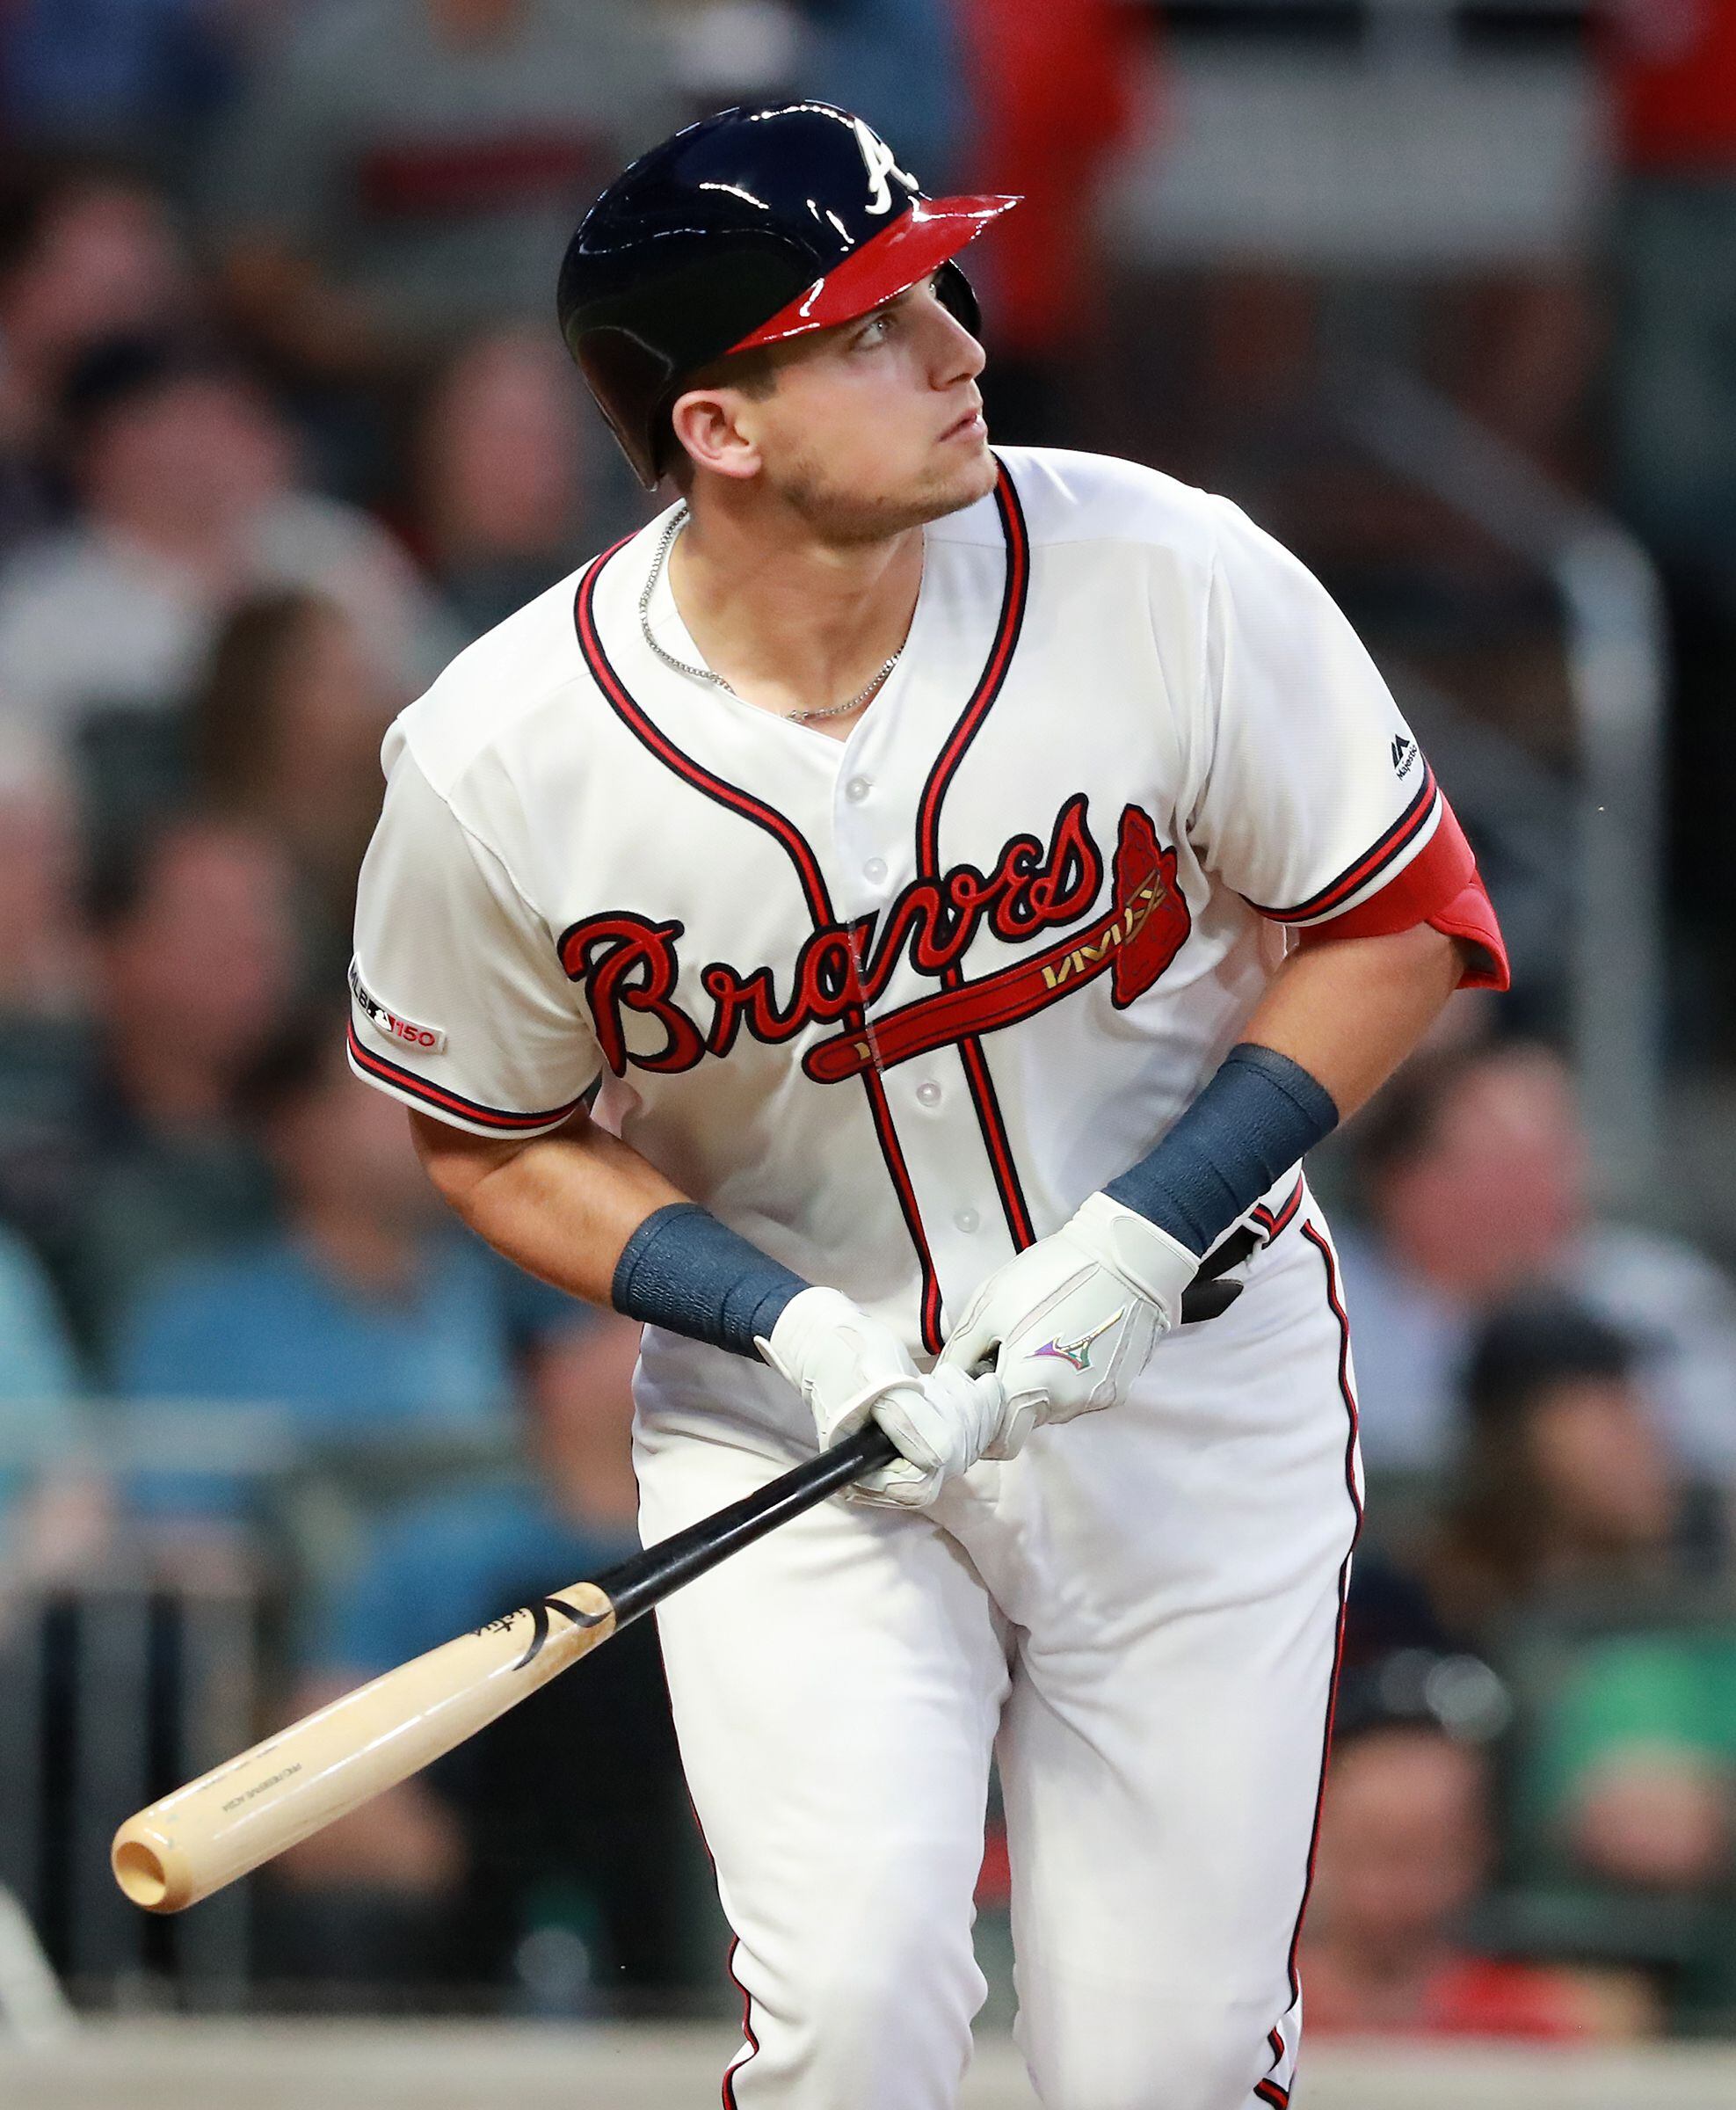 Chipper Jones on Austin Riley: I don't think he's hit his ceiling yet